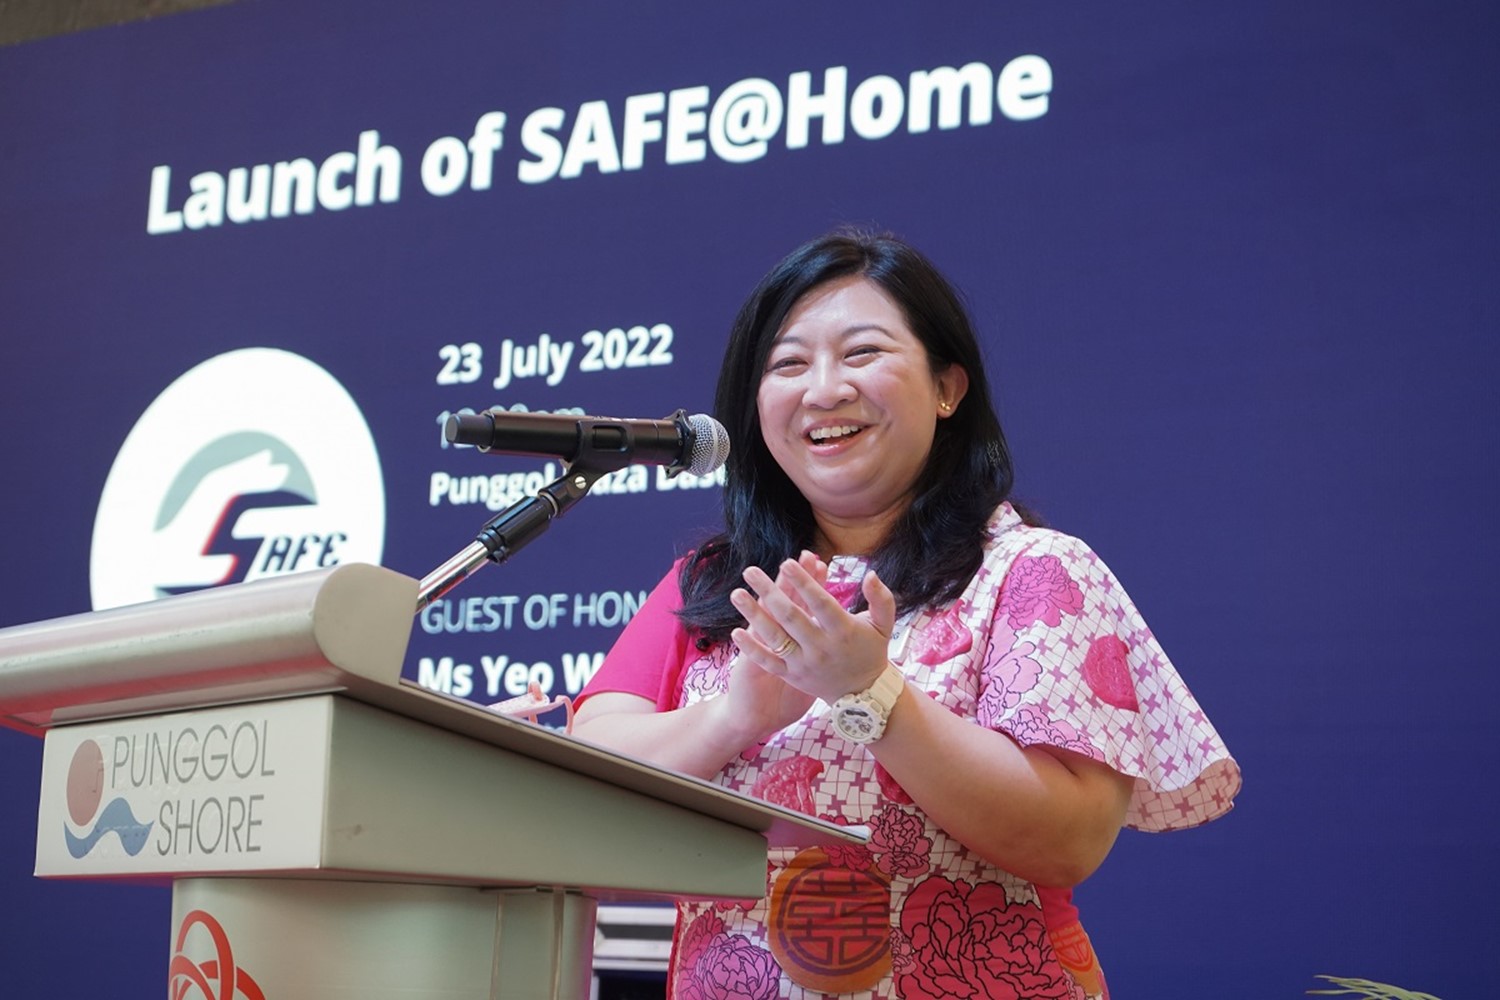 20220723_launch_of_safehome_by_mp_for_pasir_ris_punggol_grc_3